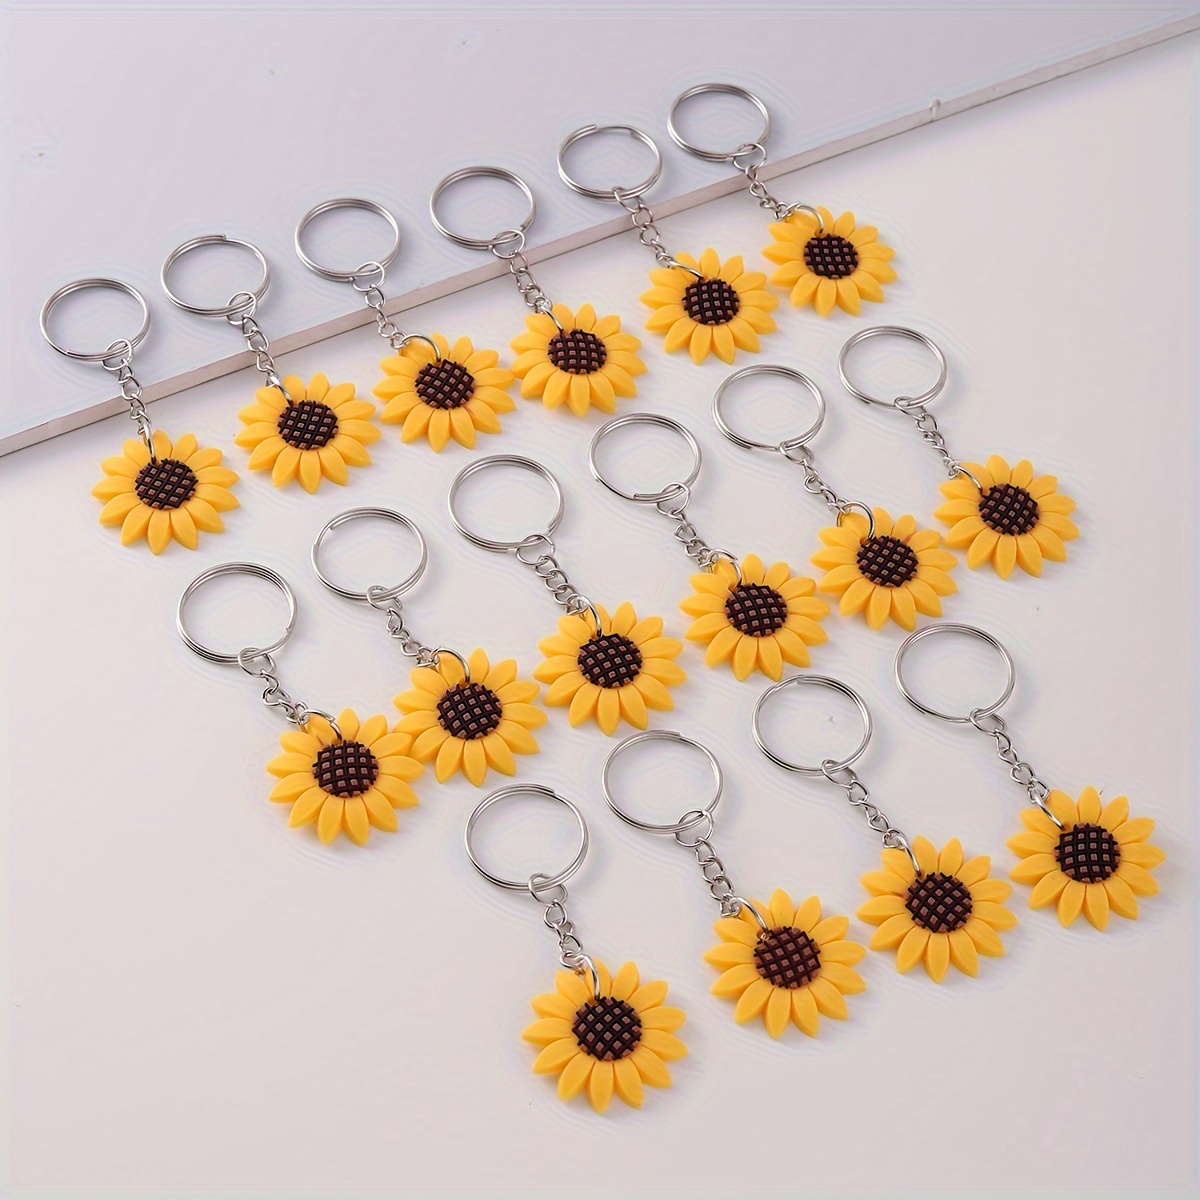 

16pcs/pack Cartoon Sunflower Keychains, Pvc Daisy Key Rings, Fashionable Casual Accessories For Women's Wallets, Backpacks & Handbags, Perfect For Anniversary Gifts